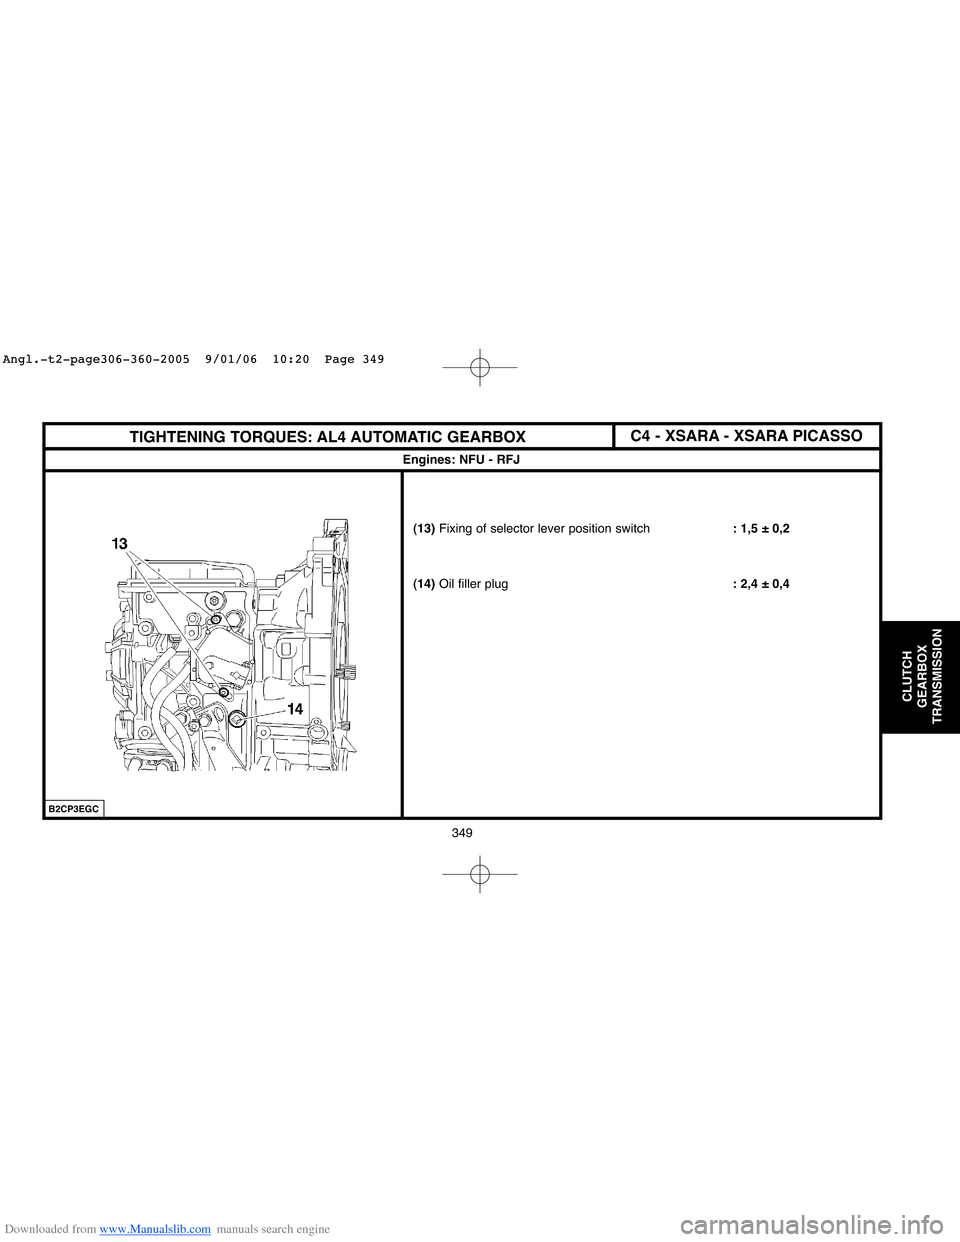 Citroen XSARA PICASSO 2005 1.G Workshop Manual Downloaded from www.Manualslib.com manuals search engine 349
CLUTCH
GEARBOX
TRANSMISSION
Engines: NFU - RFJ
B2CP3EGC
(13)Fixing of selector lever position switch: 1,5 ± 0,2
(14)Oil filler plug: 2,4 �